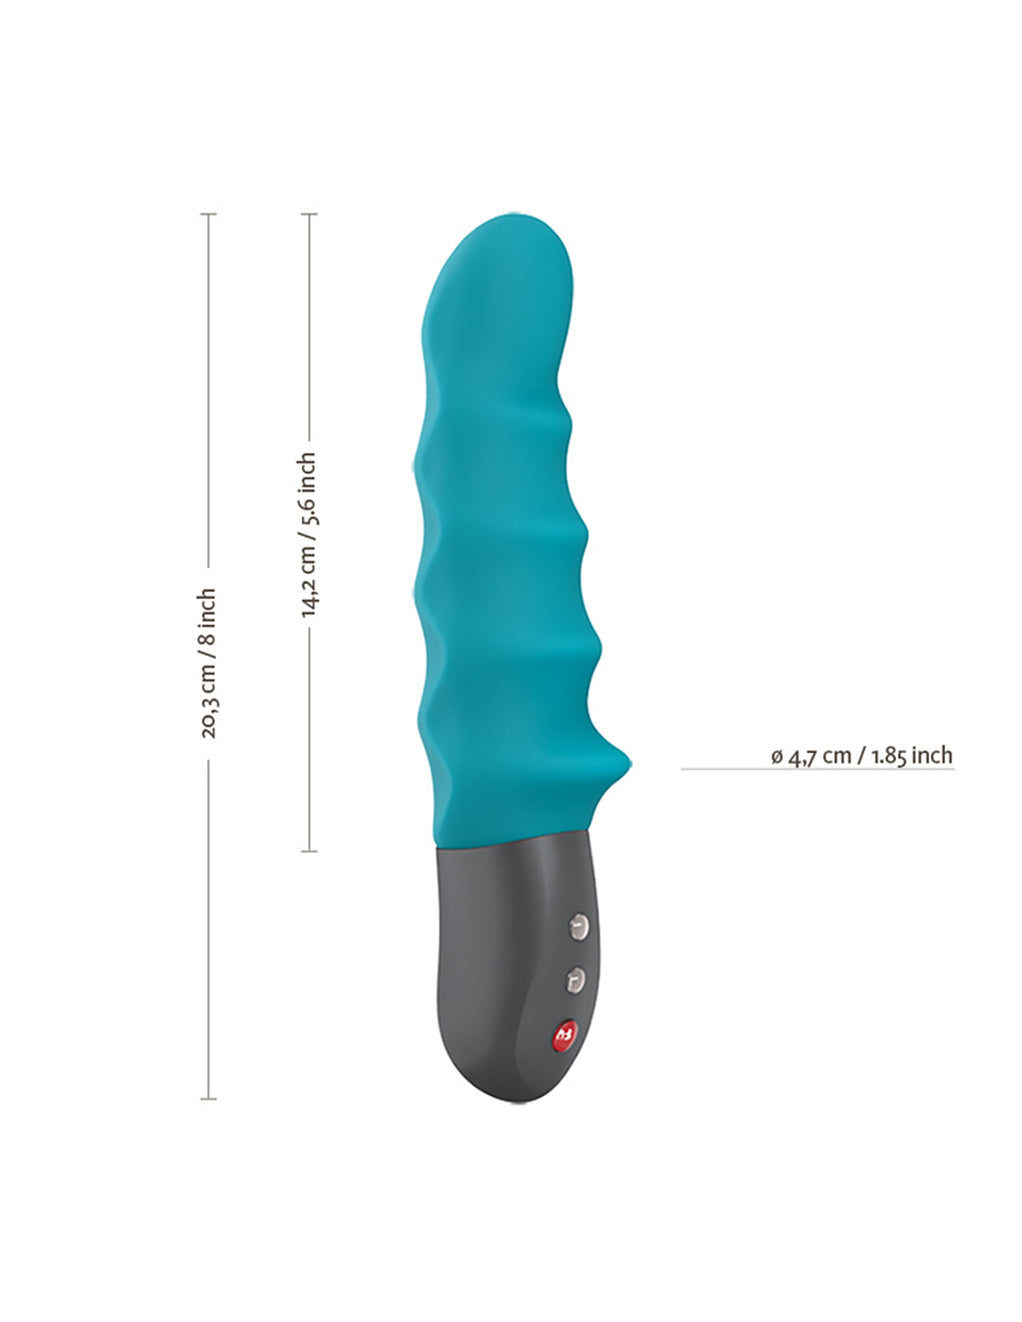 Stronic Surf Vibrator by Fun Factory blue sizing